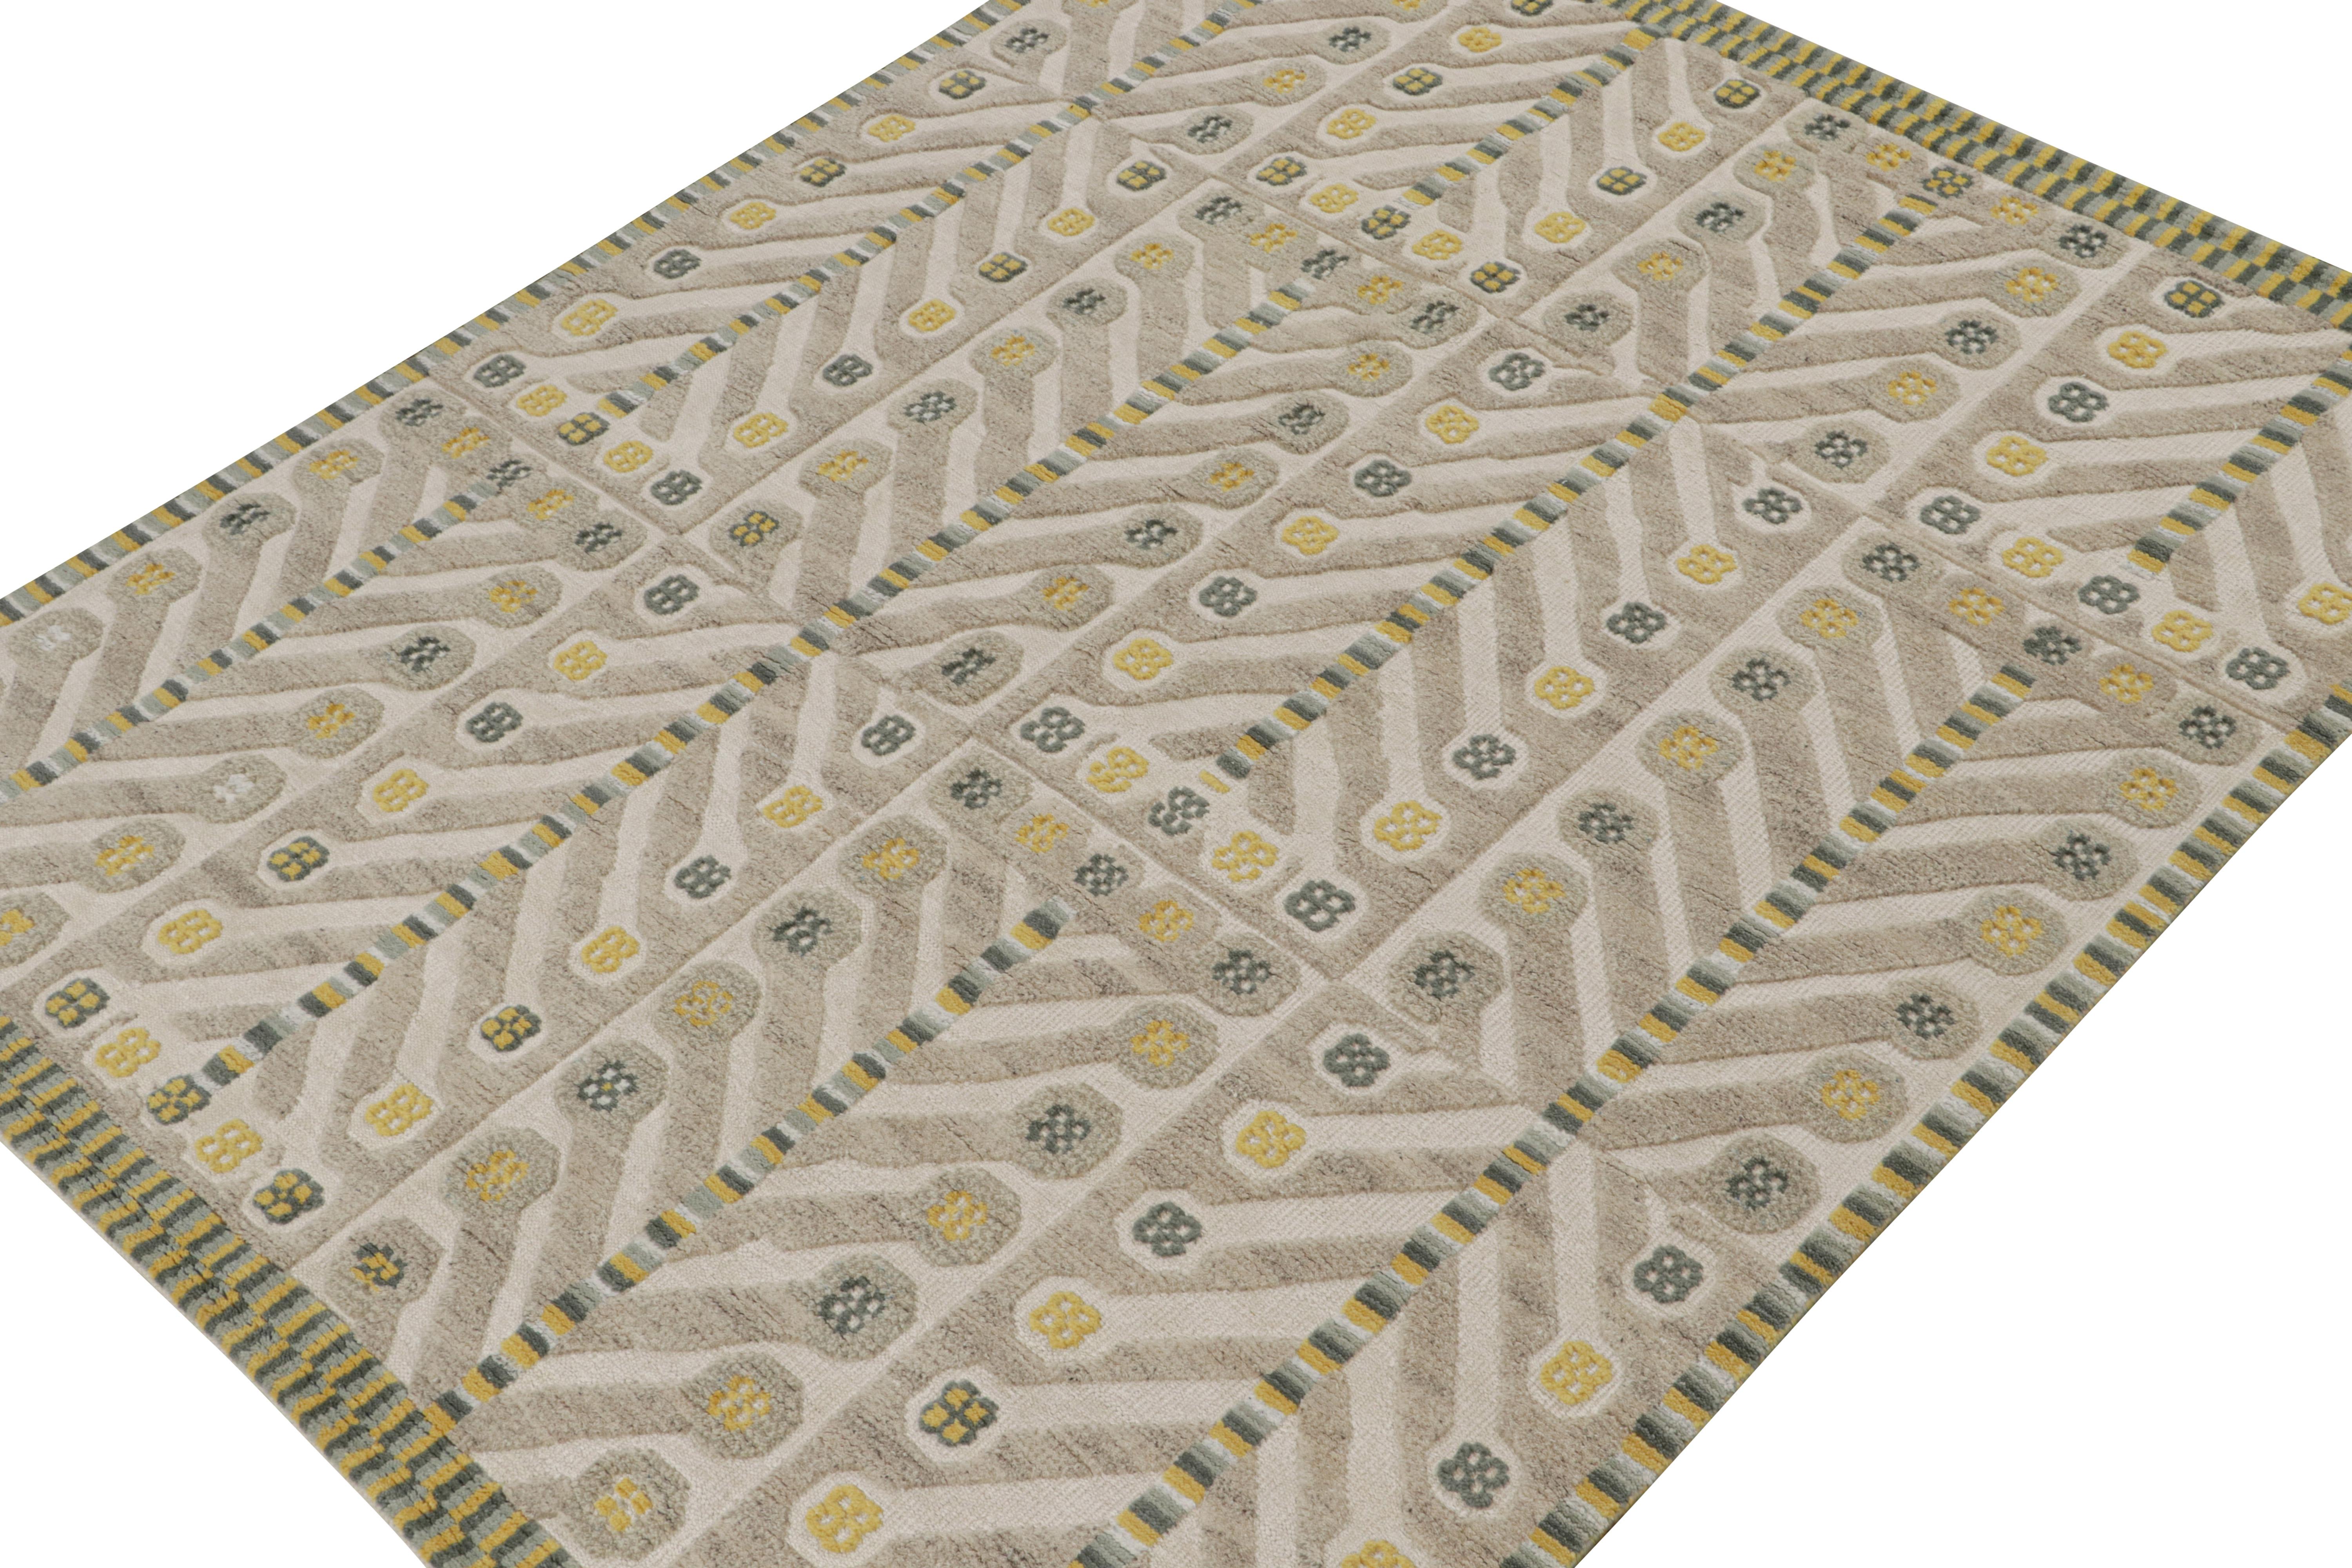 A smart 8x10 Swedish style rug from our award-winning Scandinavian collection. Hand-knotted in wool.

On the Design: 

This rug enjoys geometric patterns in comfortable brown, gray-blue & gold. A keen eye would note a subtle high low element for a